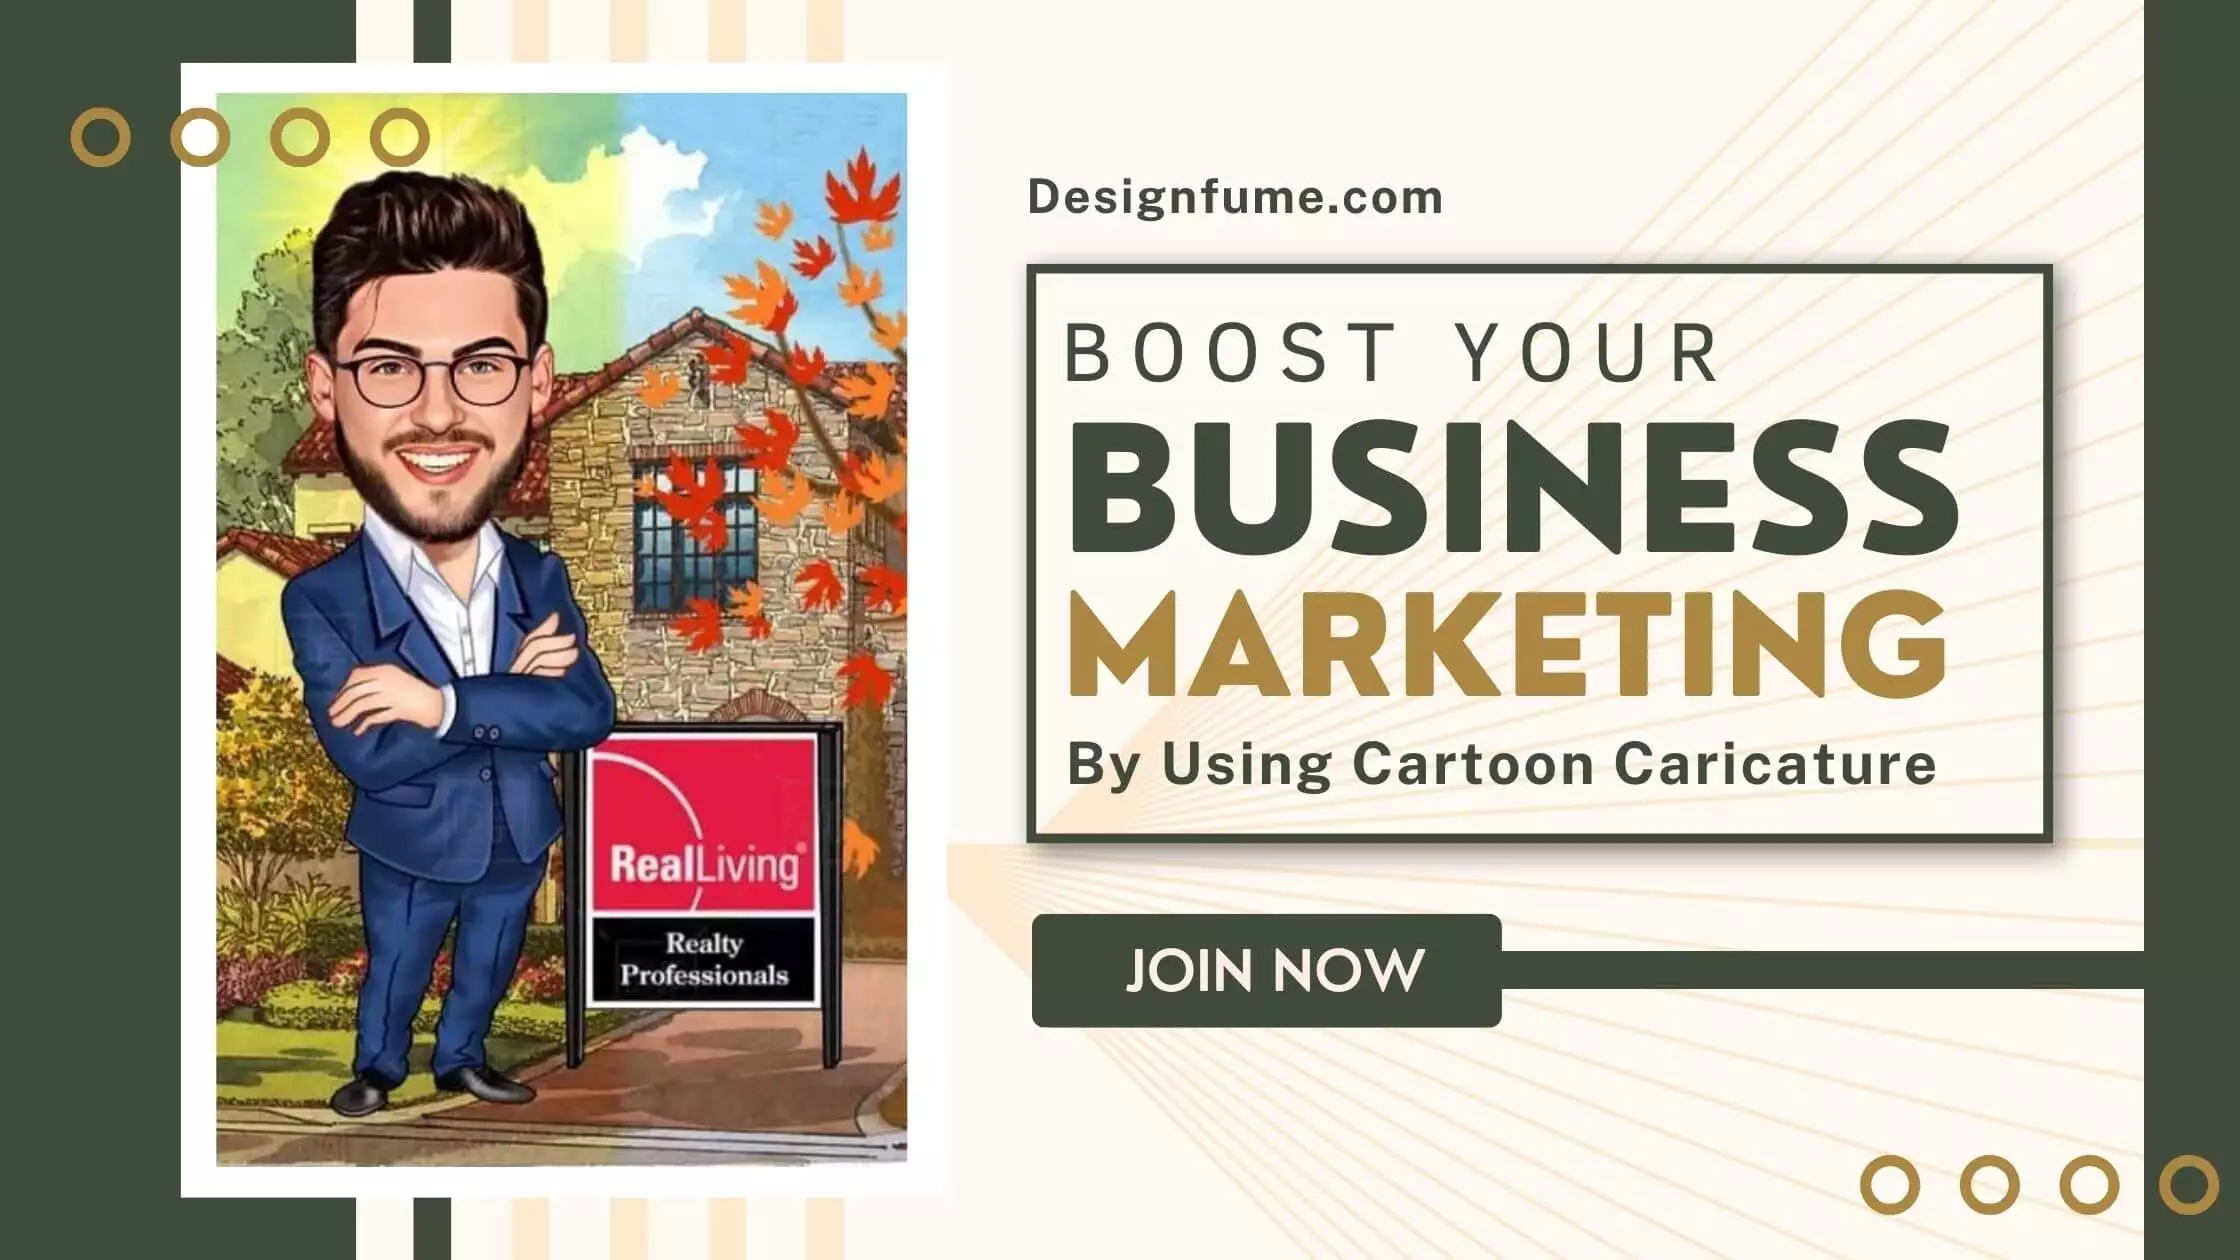 How to Boost Your Business by Using Cartoon Caricature in Marketing